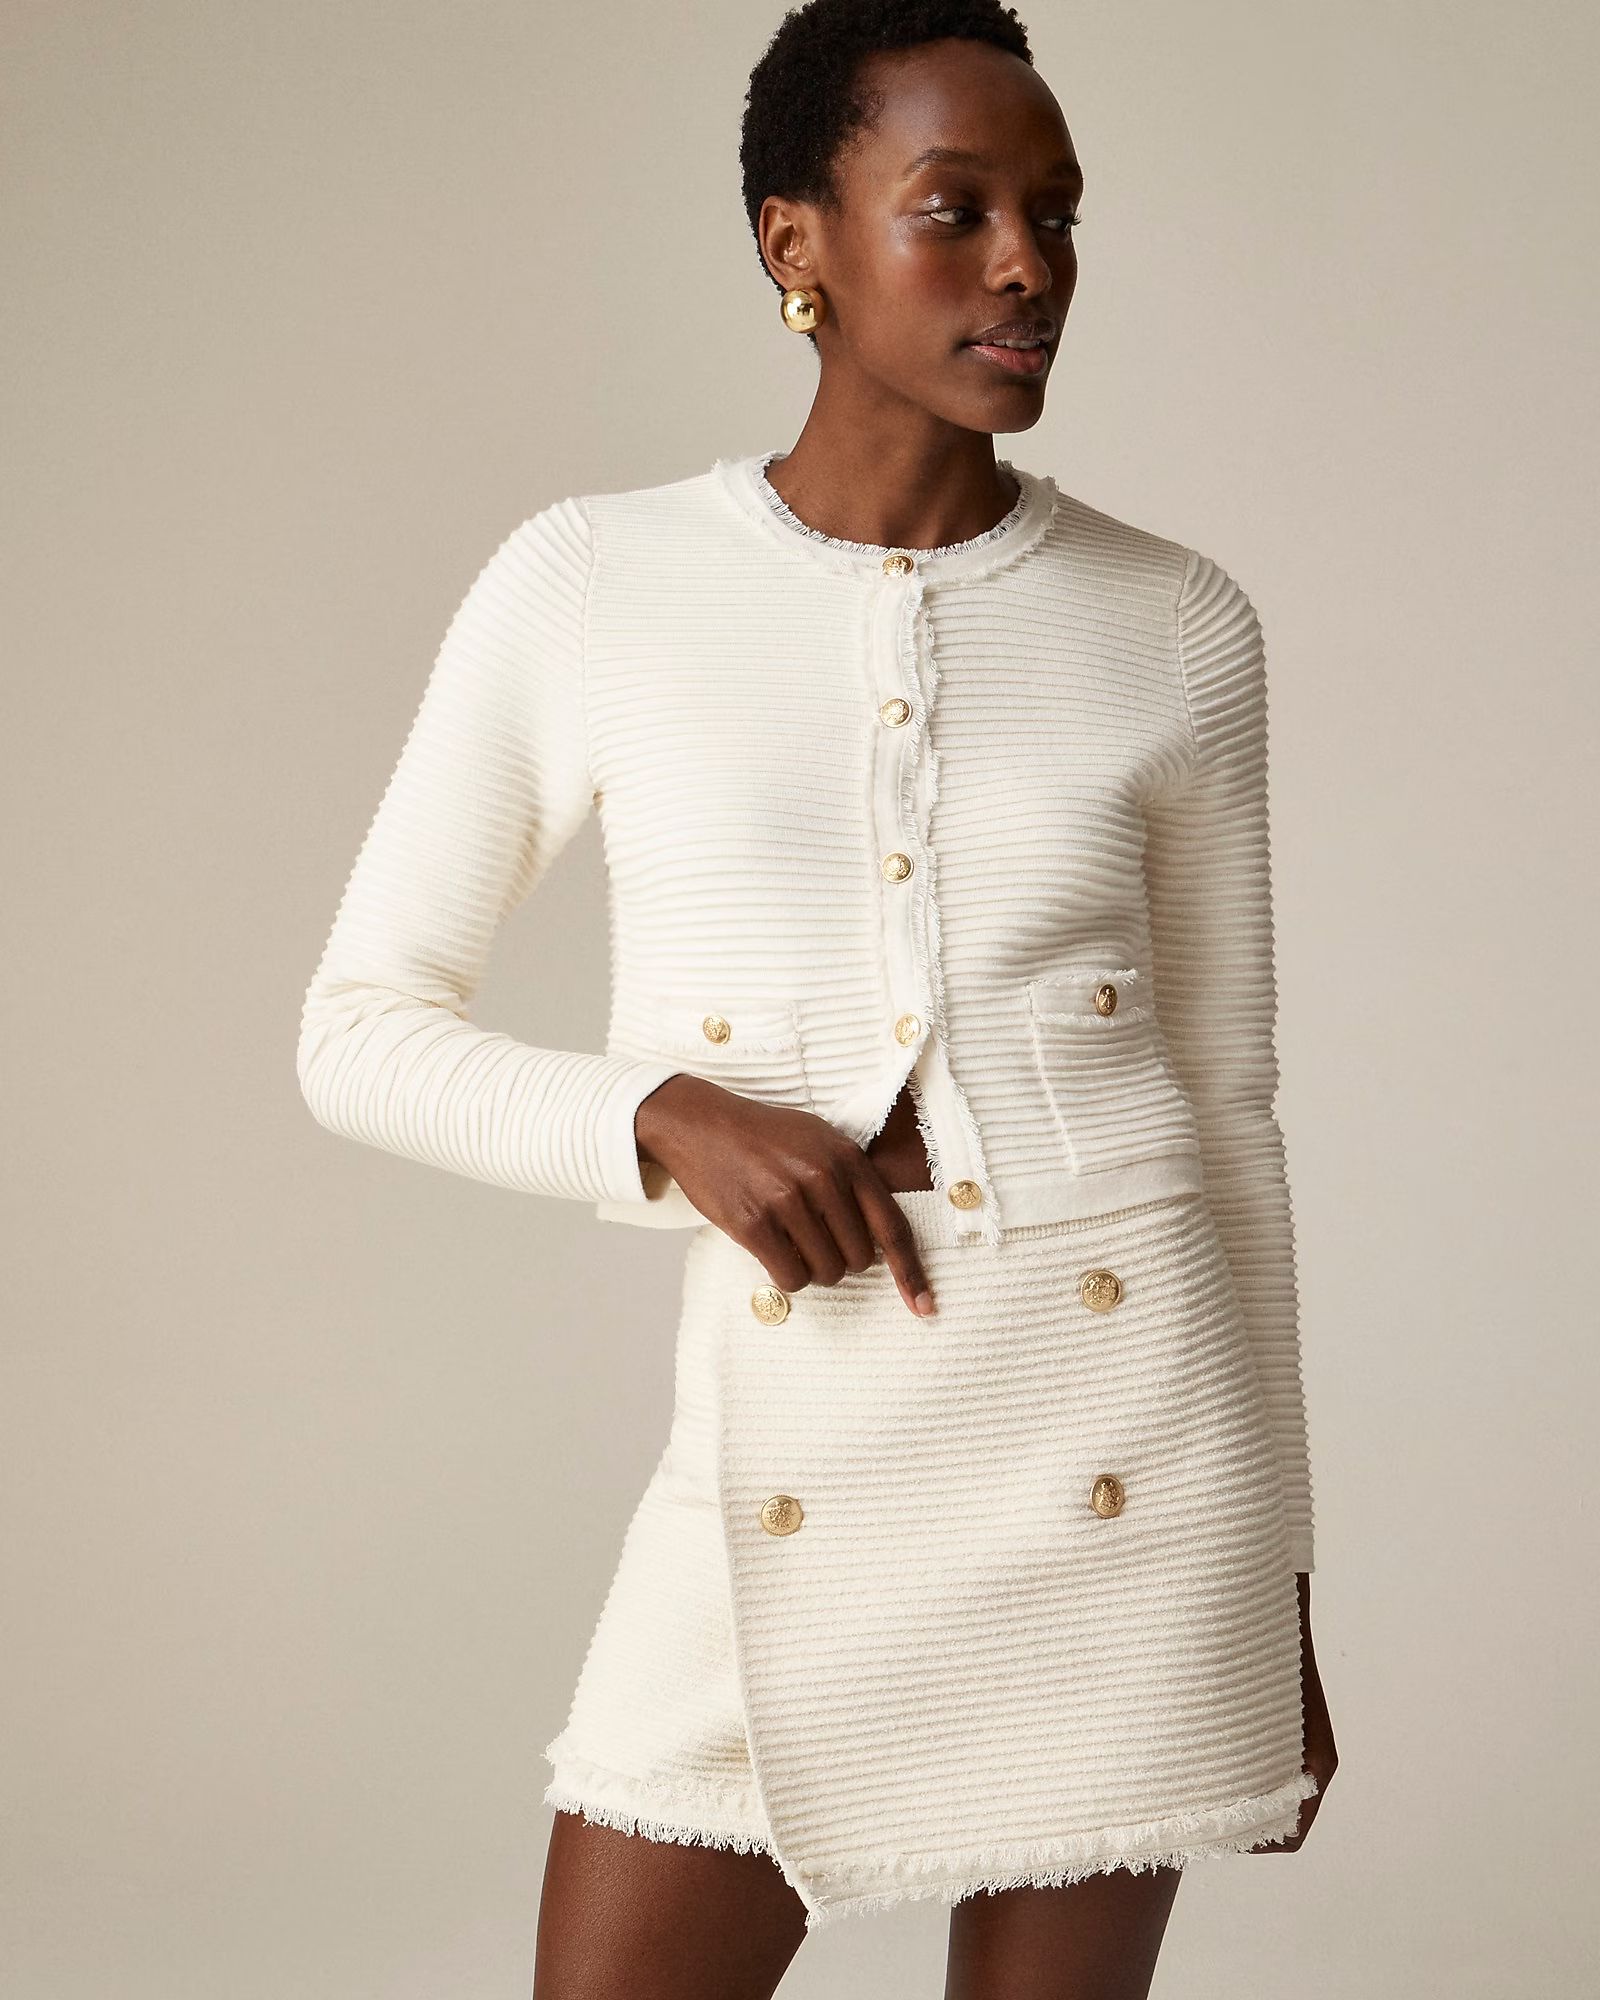 newEmilie sweater lady jacket in textured cotton$178.00IvorySelect a sizeSize & Fit InformationVi... | J.Crew US